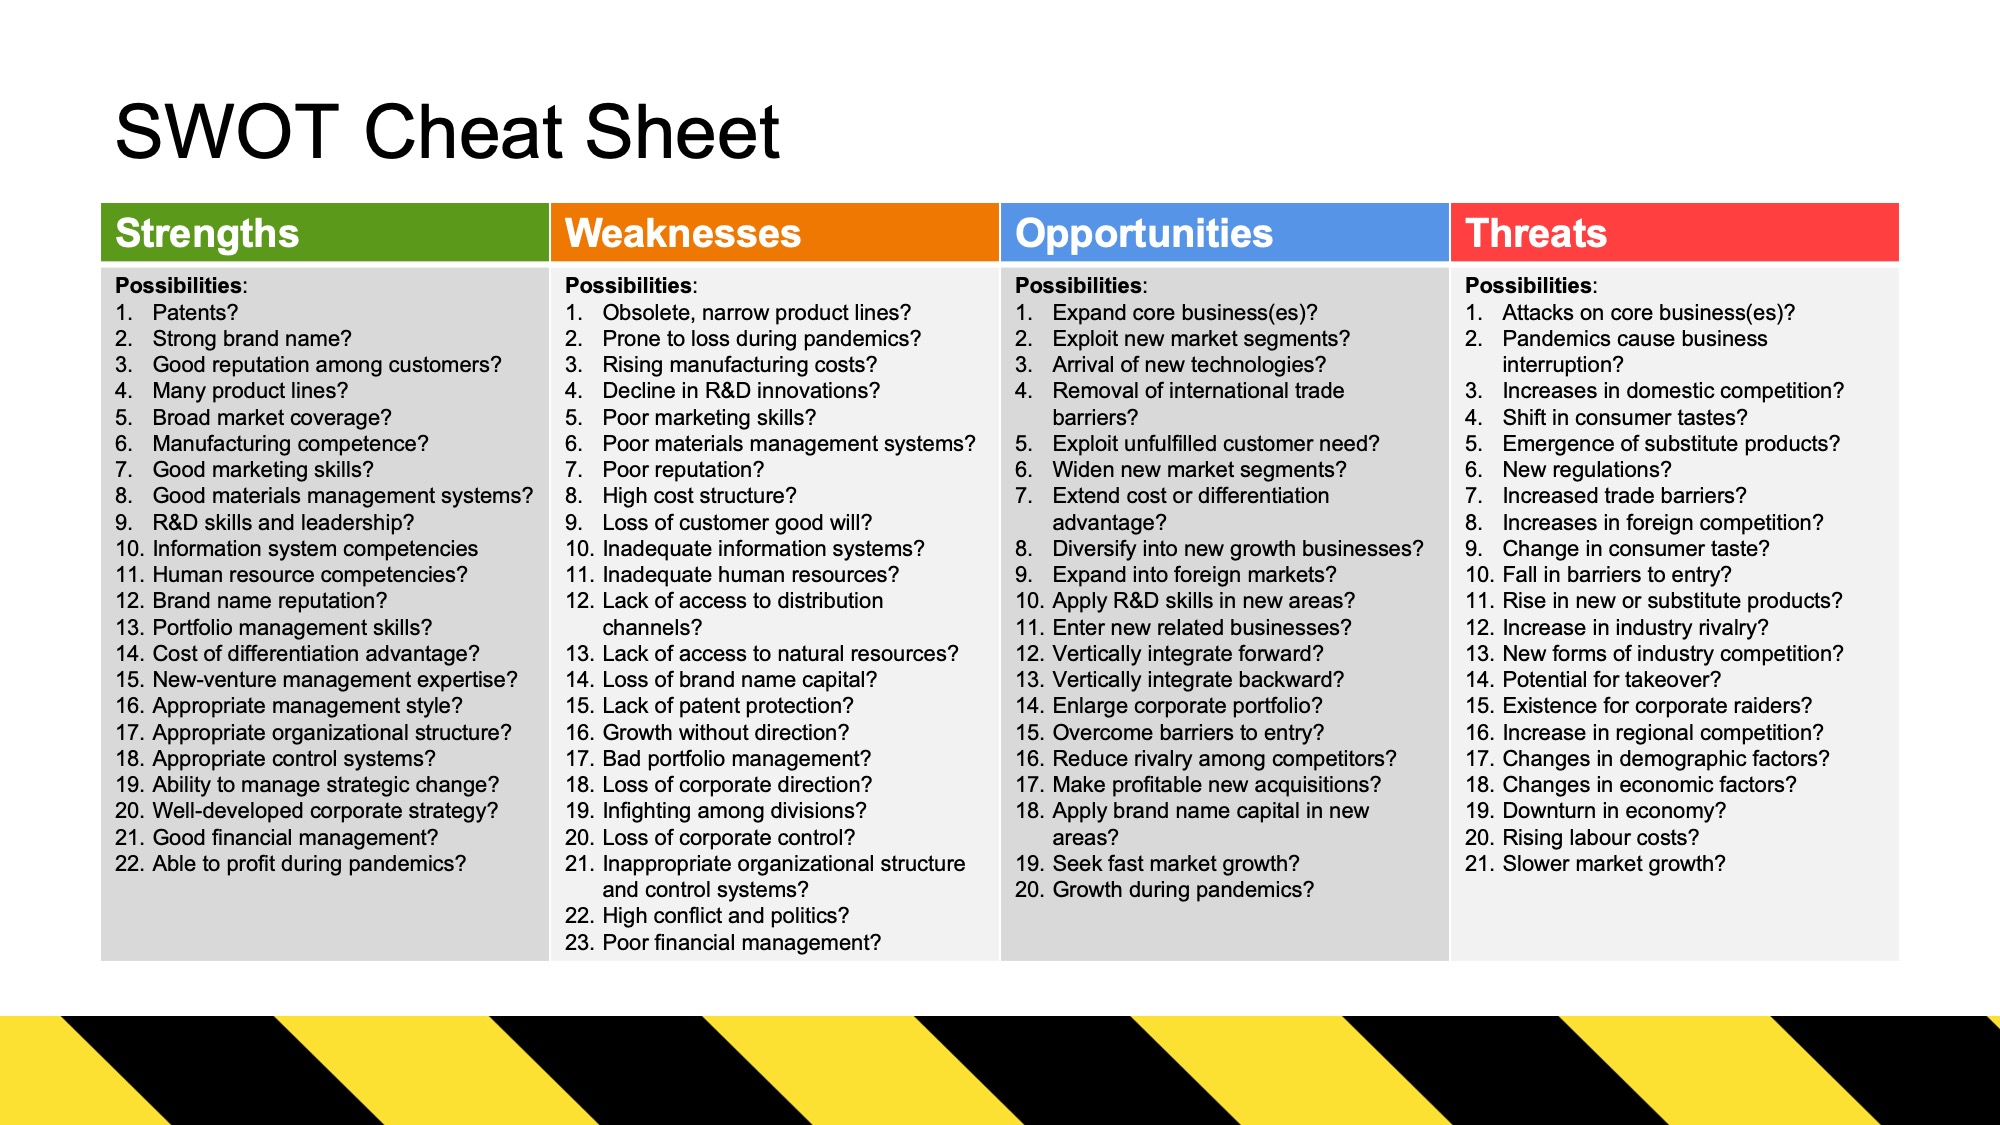 SWOT Cheat Sheet - to help brainstorm SWOT in a workshop